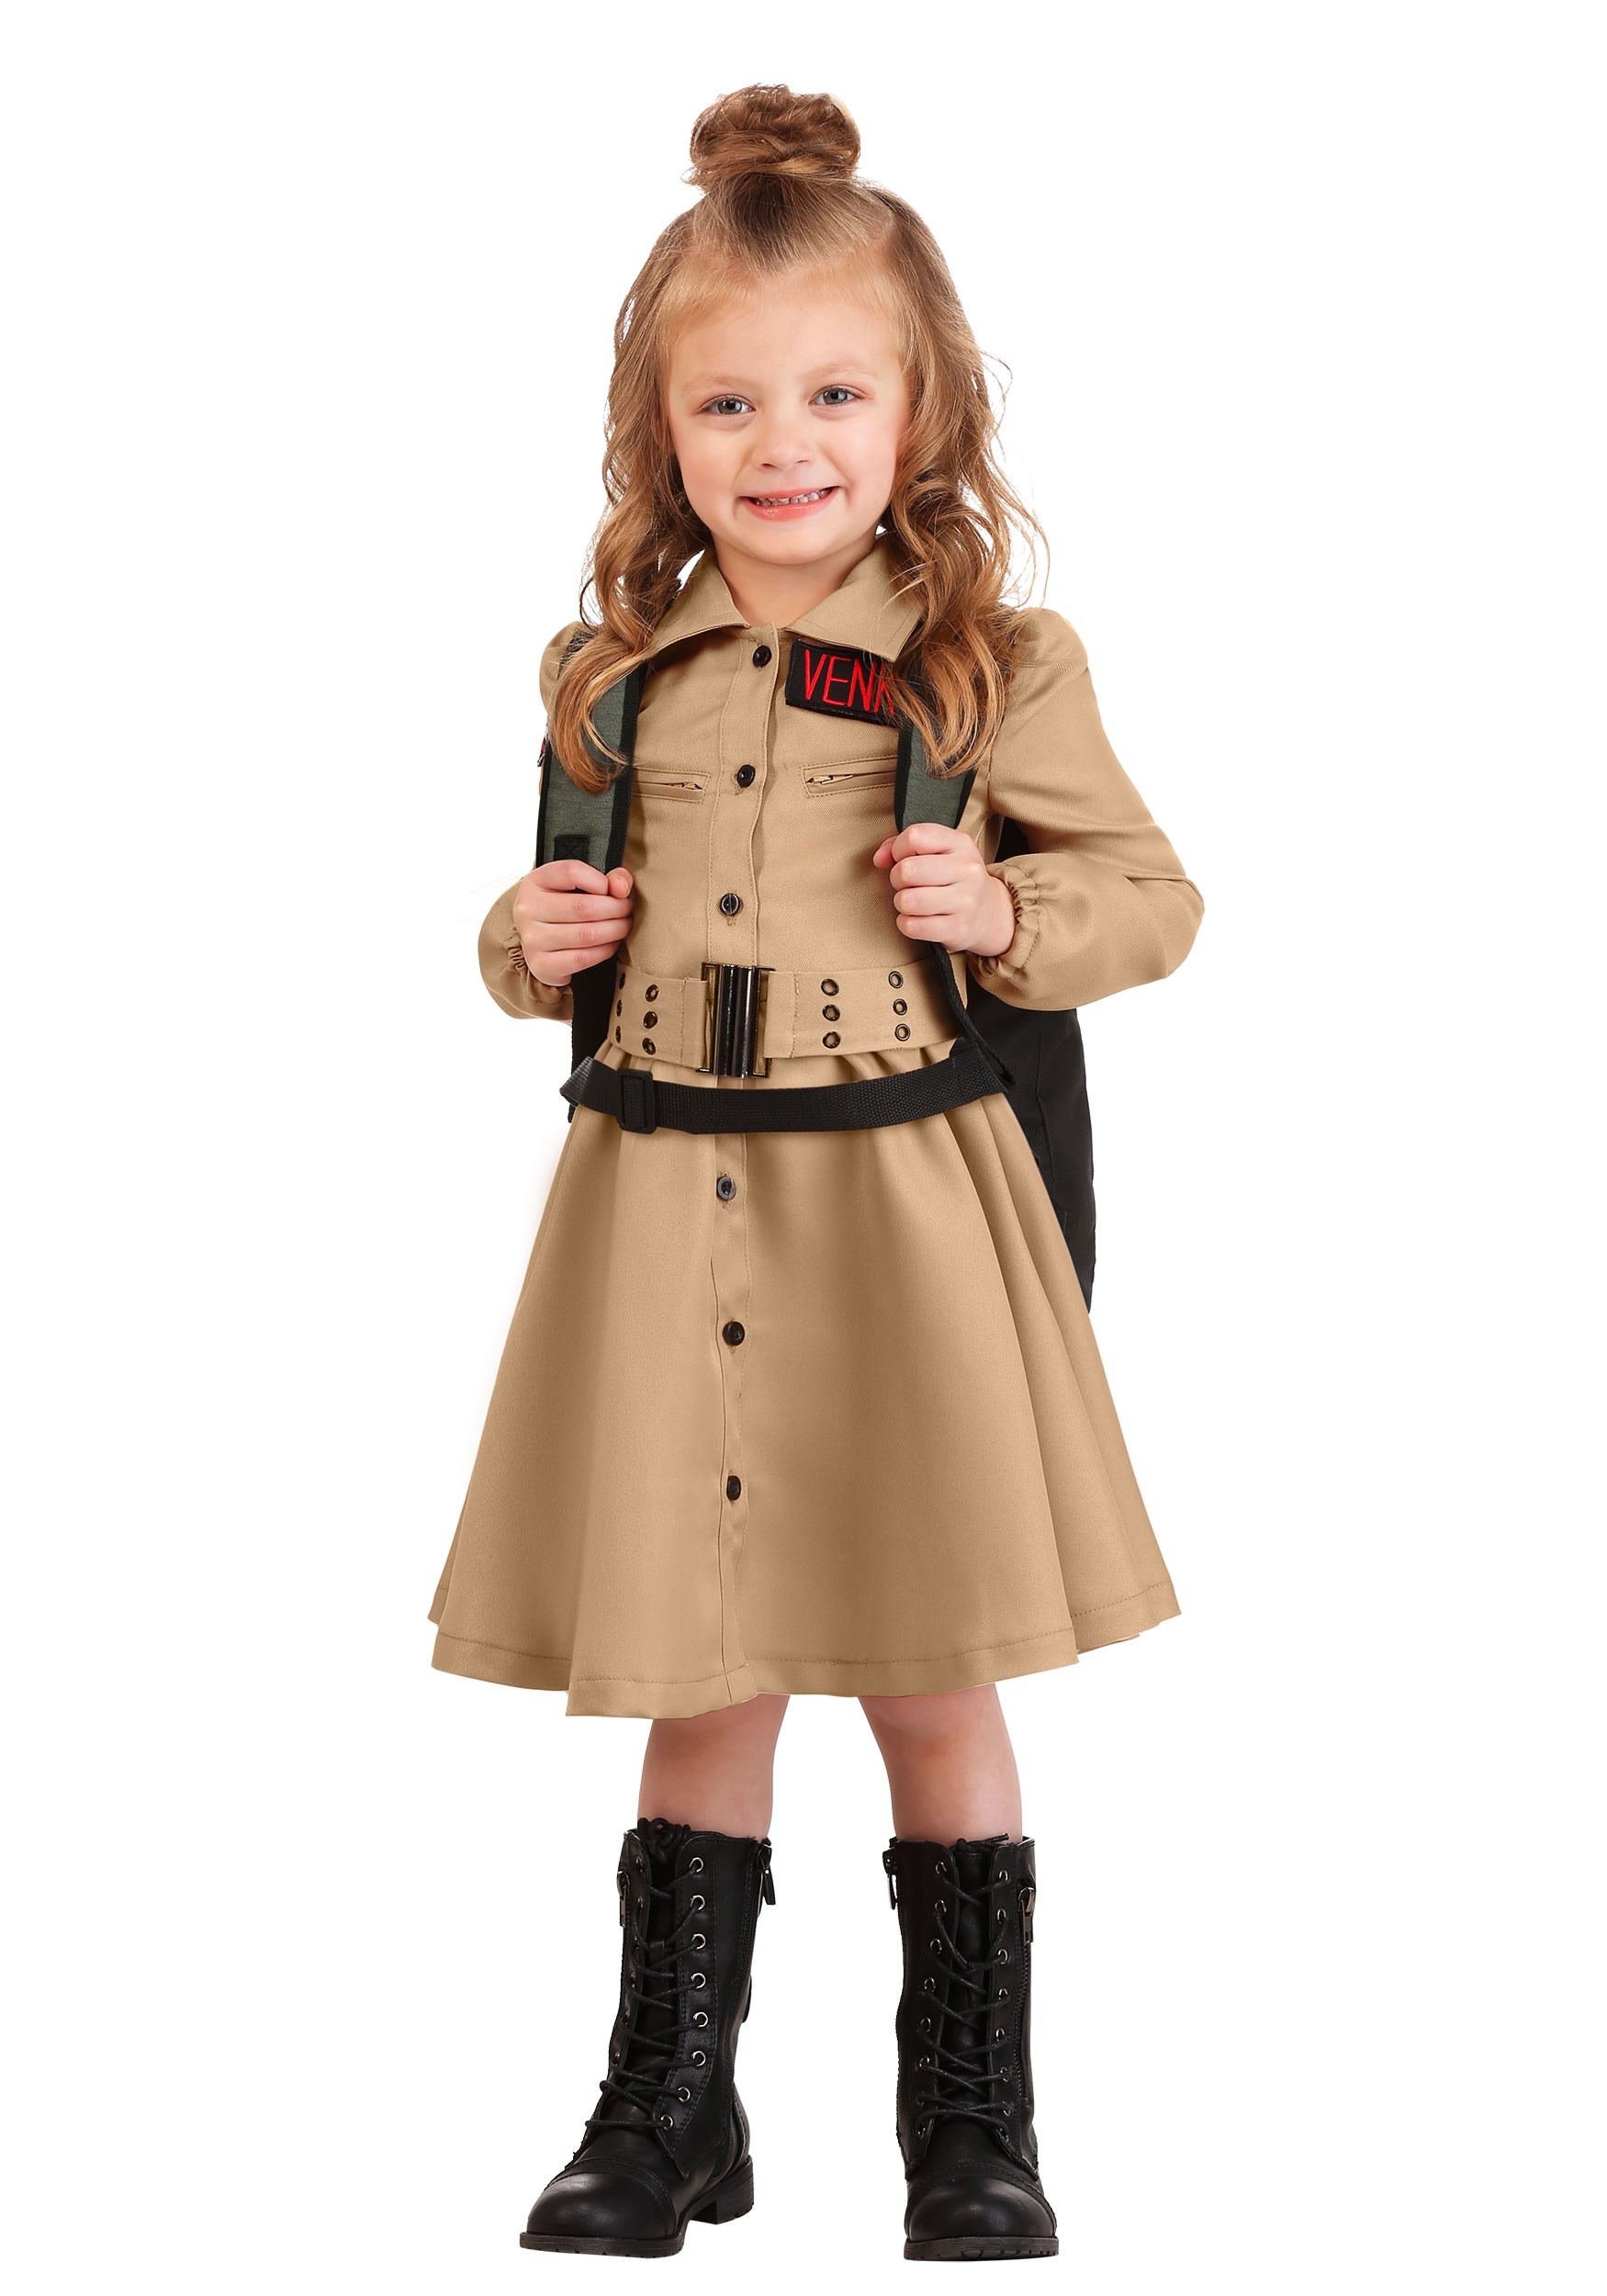 Ghostbusters Toddler Girls Costume Dress